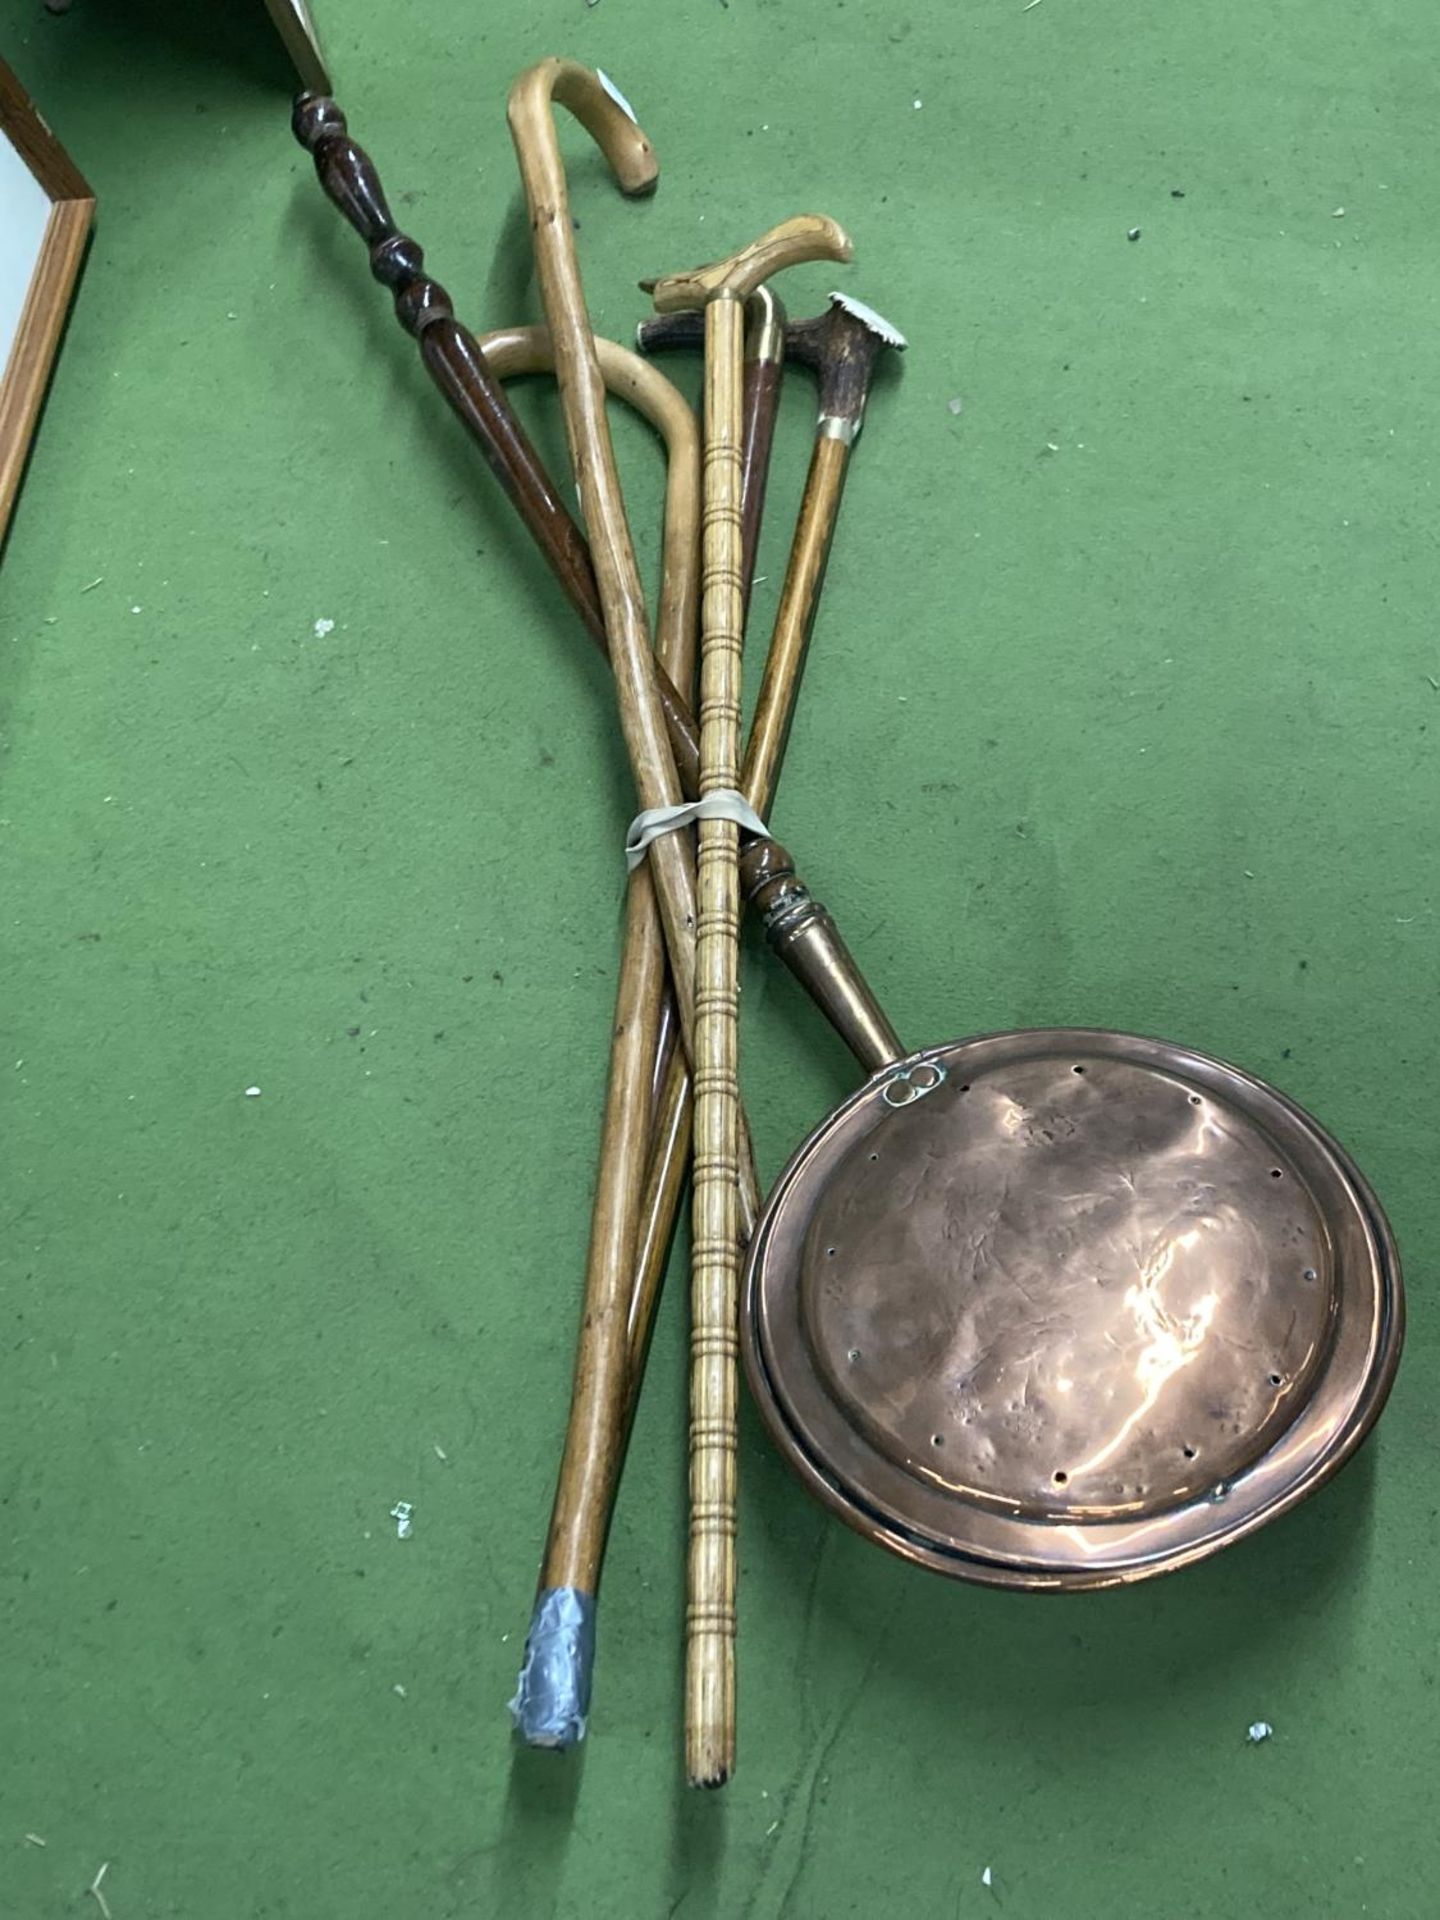 FIVE VINTAGE WALKING STICKS TO INCLUDE WITH A BRASS DUCK HEAD HANDLE AND A COPPER WARMING PAN